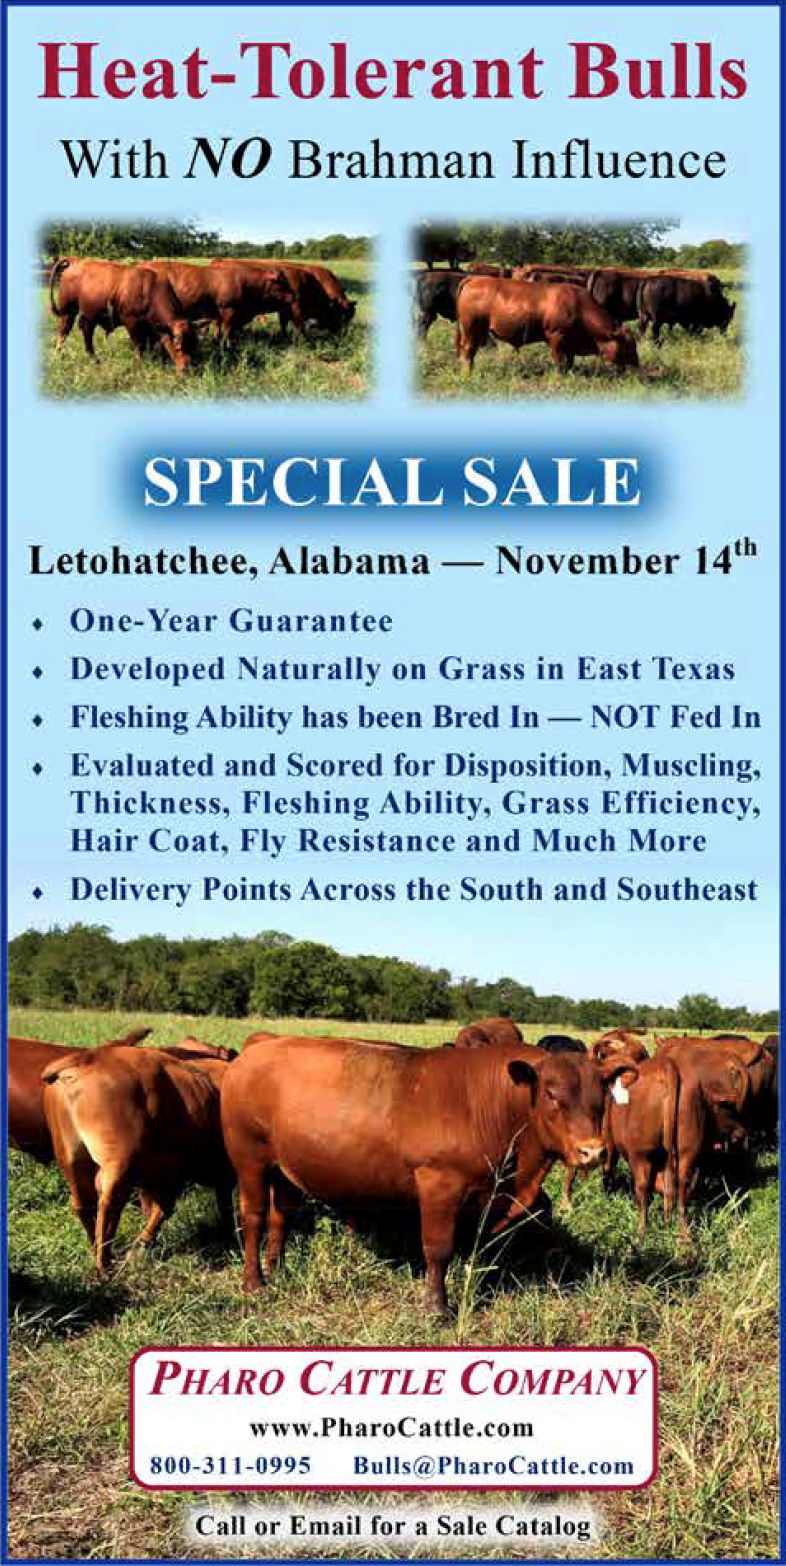 Pharo Cattle Company Special Sale